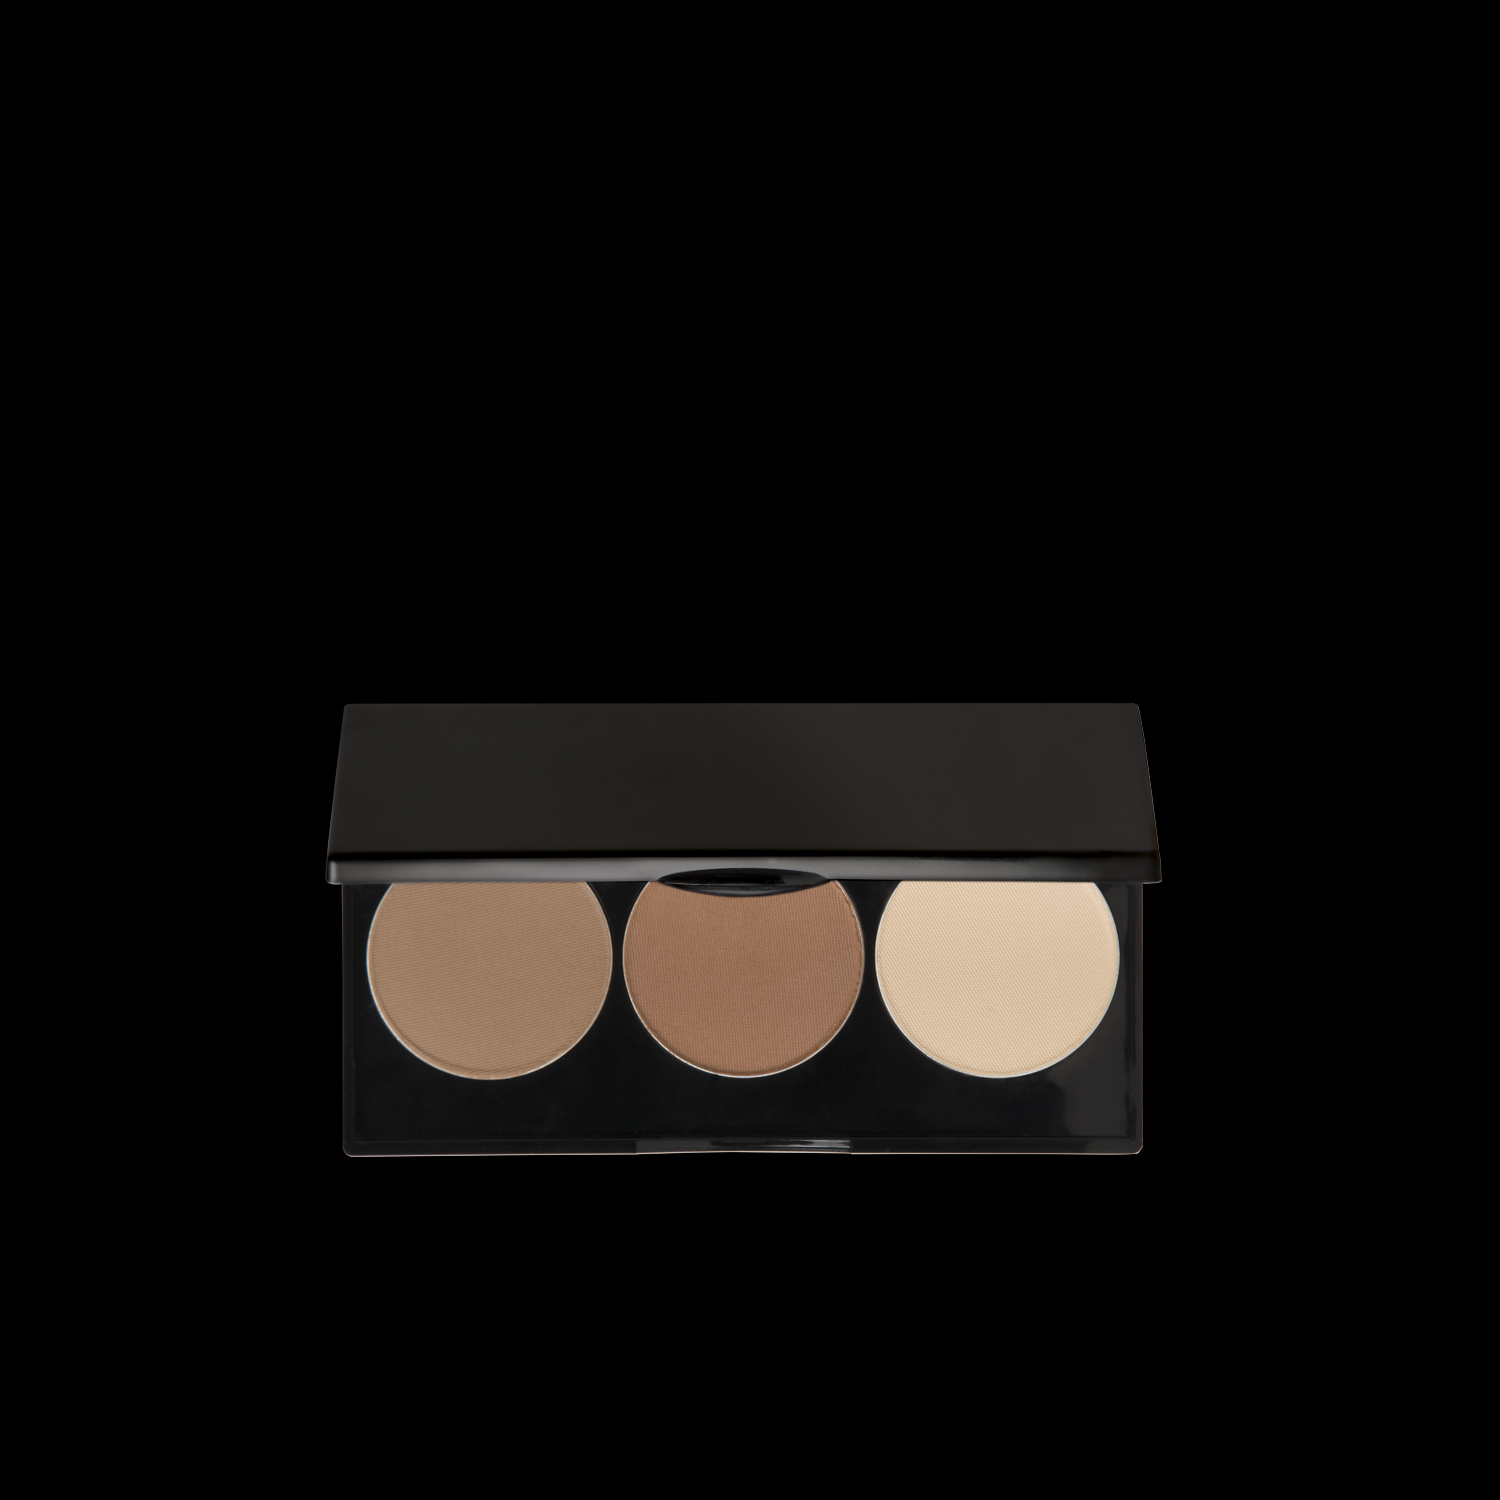 Contour Powder Finish Pre Filled 3 Well Palette